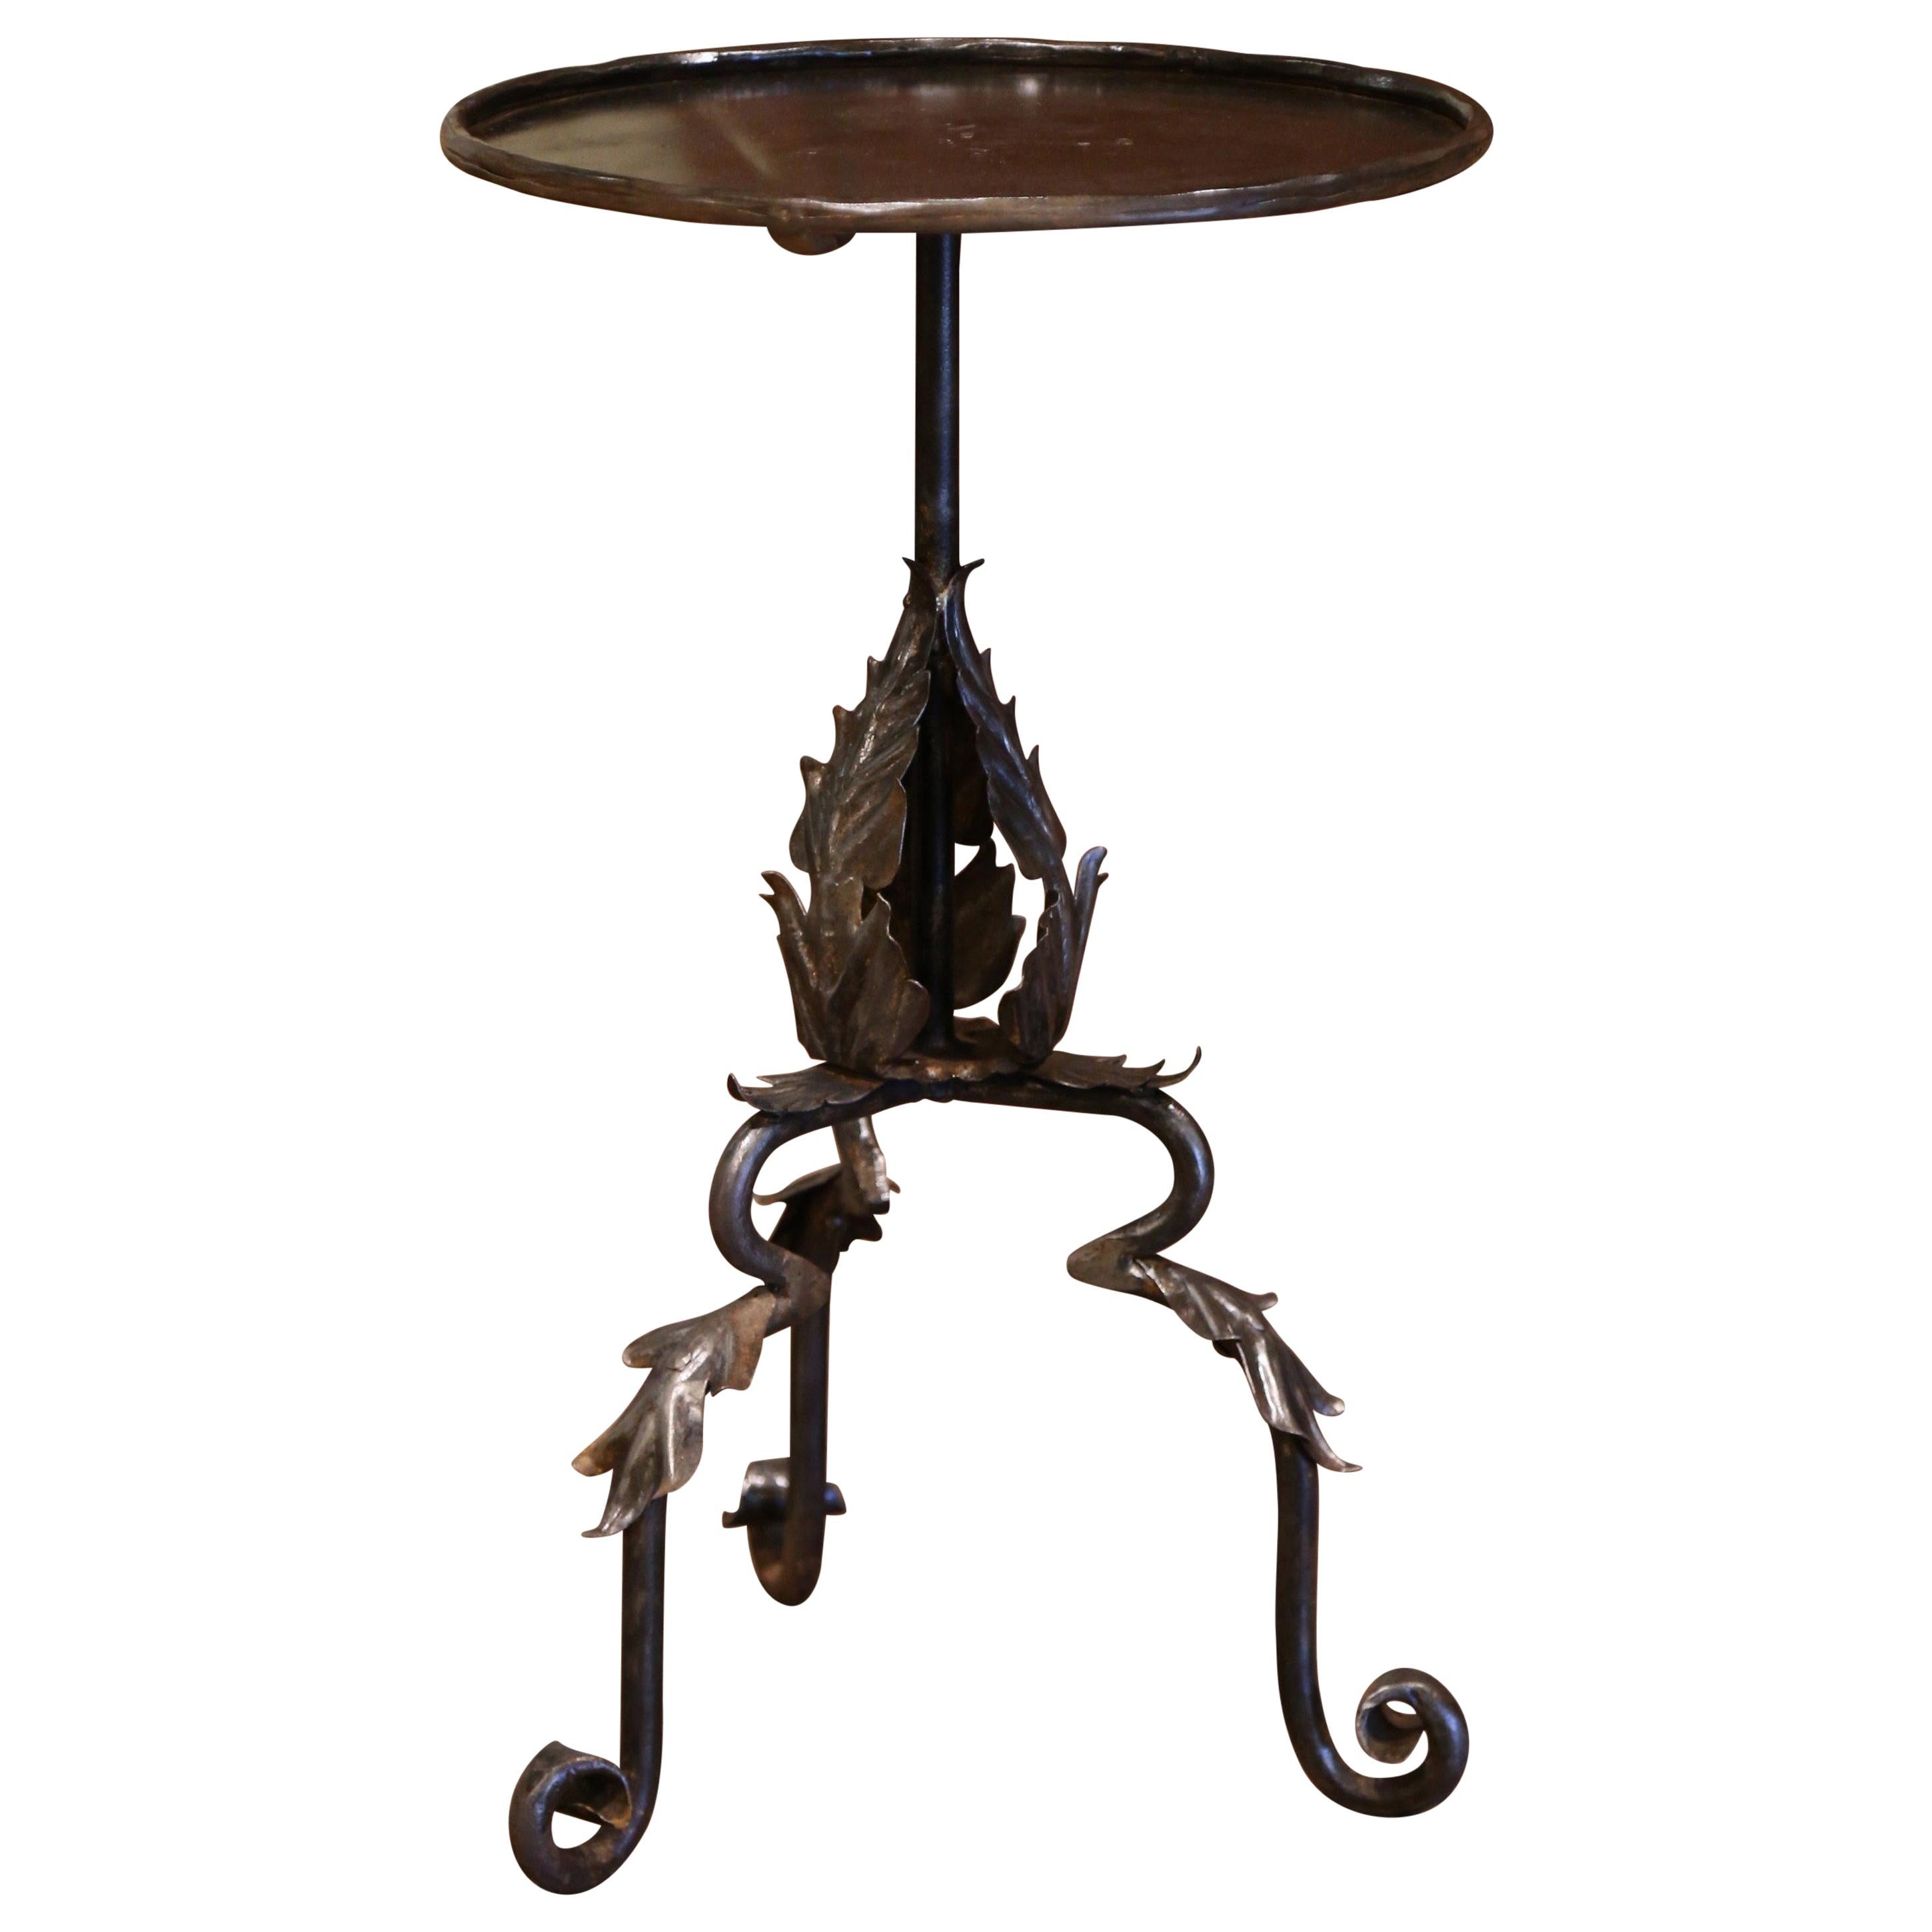 Early 20th Century French Forged and Polished Iron Martini Pedestal Table